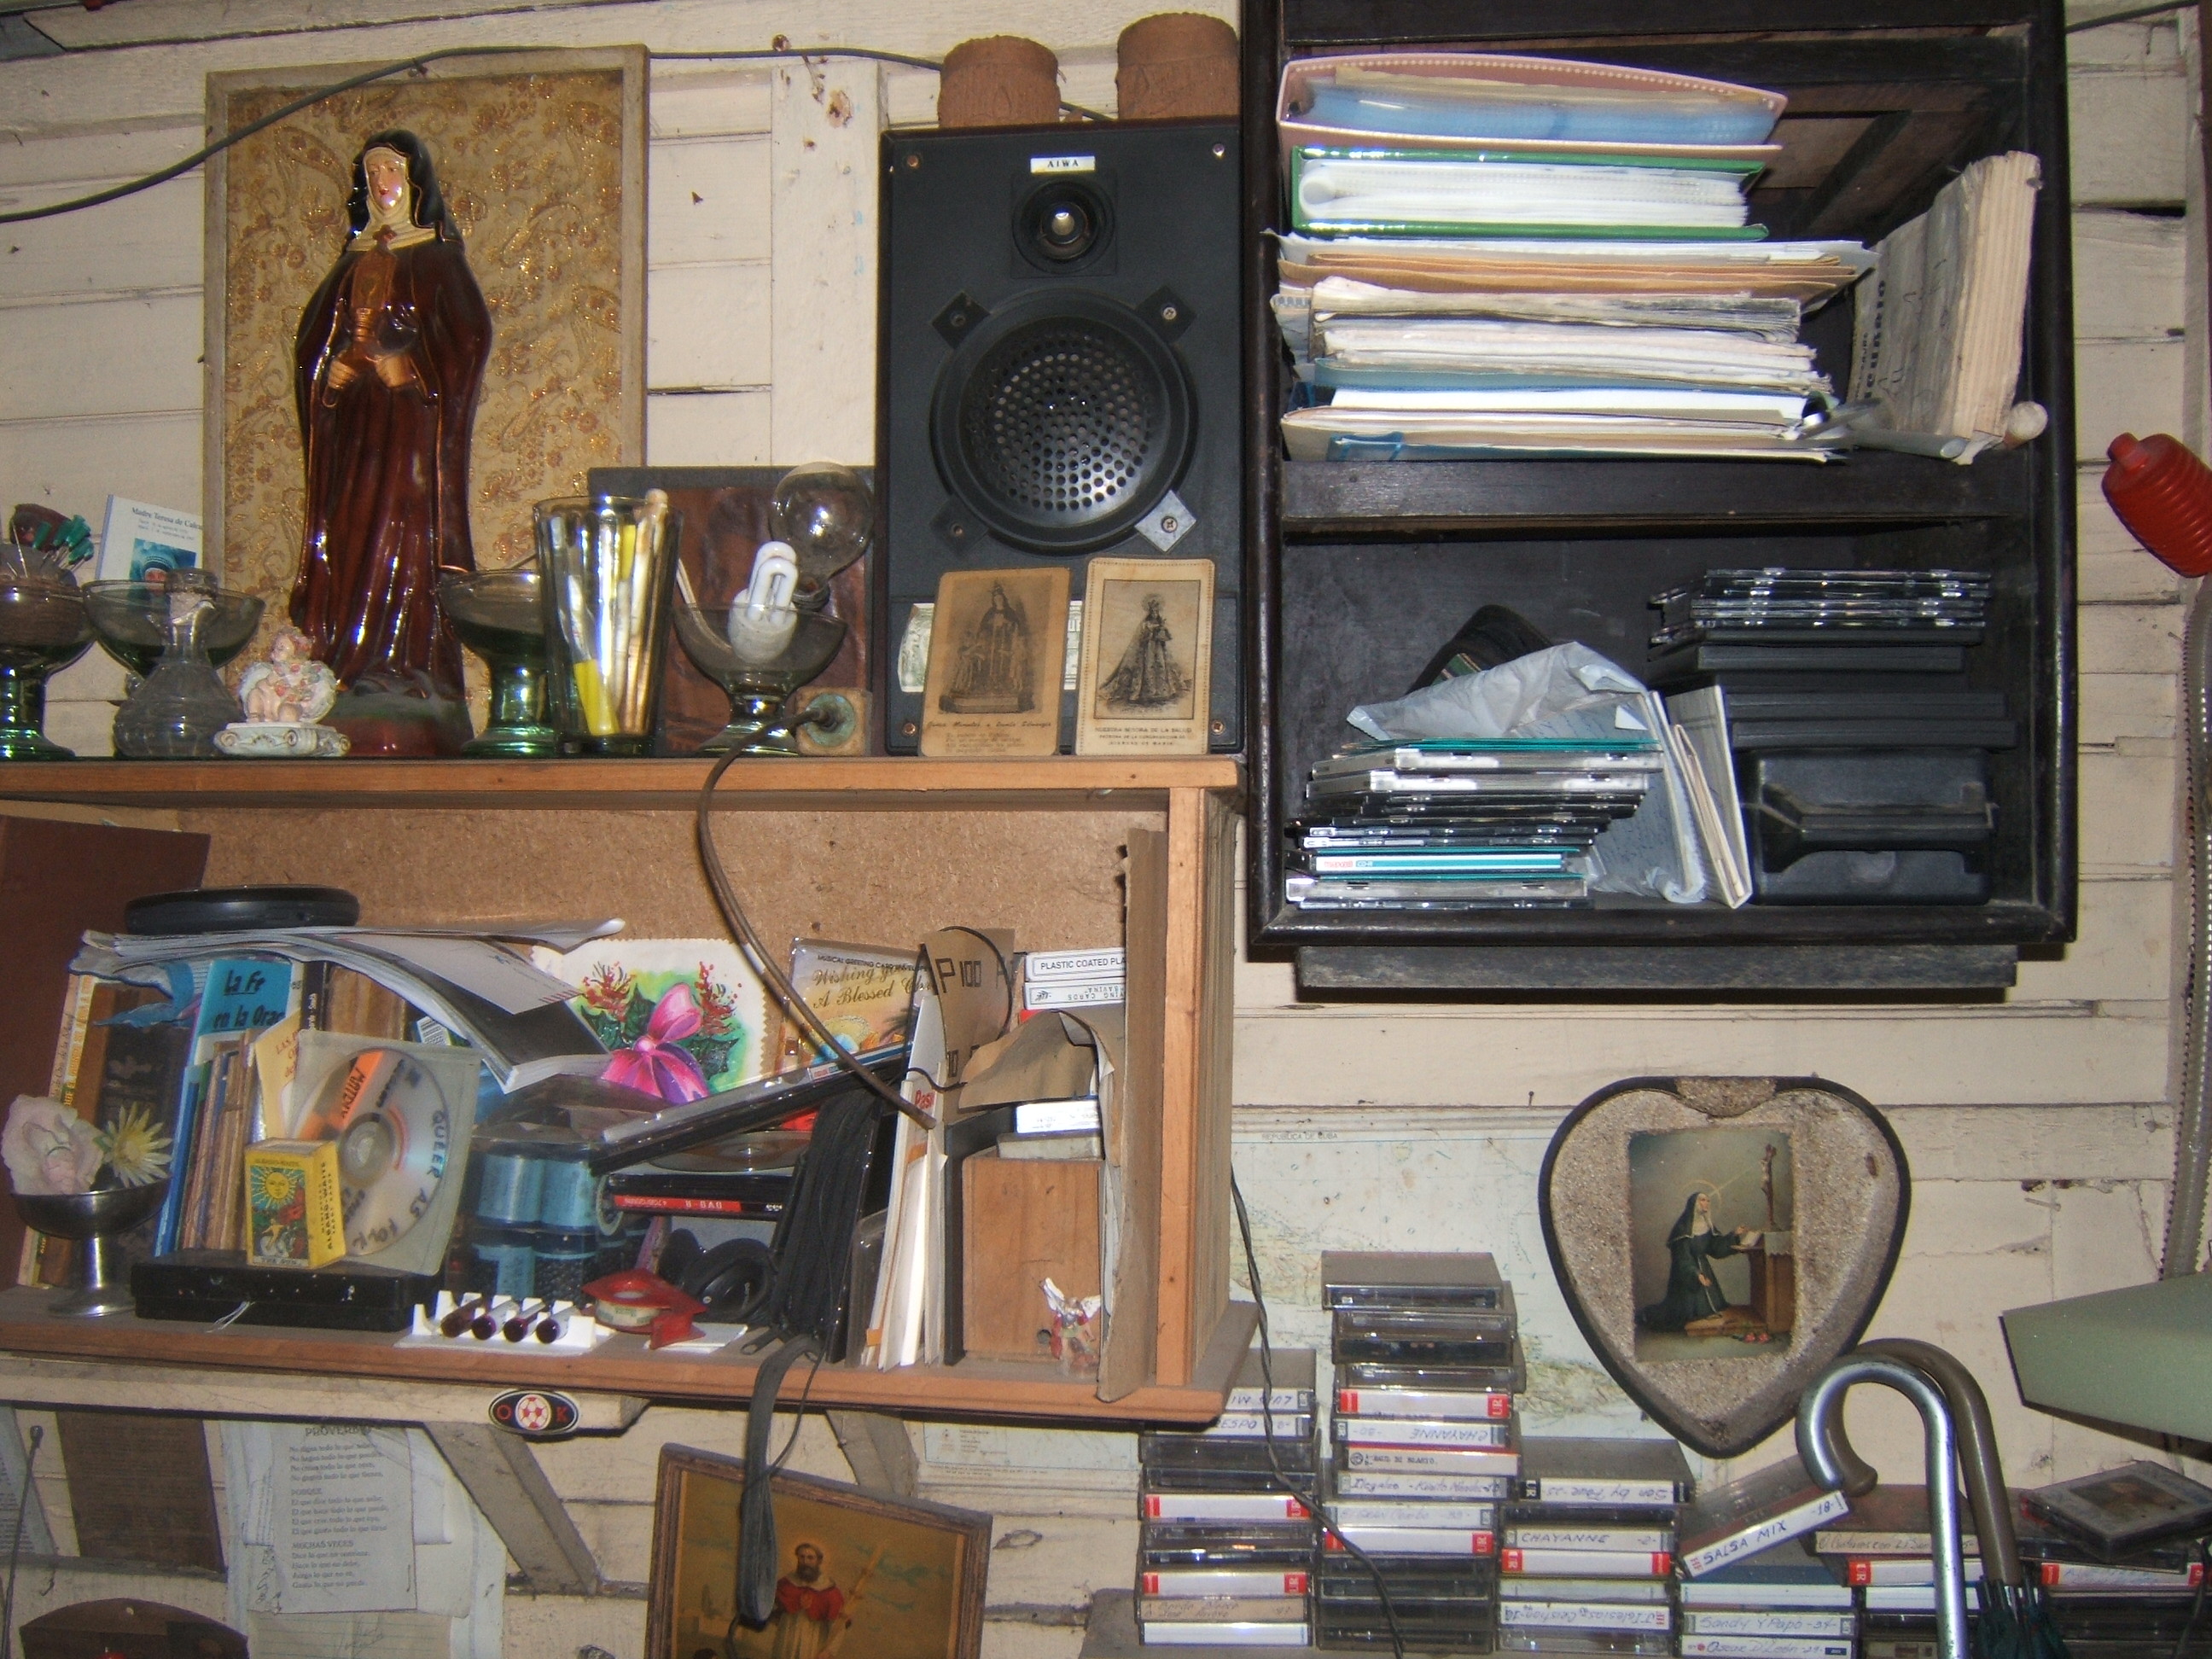 Figure 11. Another part of Pedro’s altar, showing a Santa Rita plaster figurine on a shelf, with other saints’ images, surrounded by cassettes, compact discs, notebooks, religious manuals, a speaker, and other supplies. Santiago de Cuba, August 2008. Photograph by author.